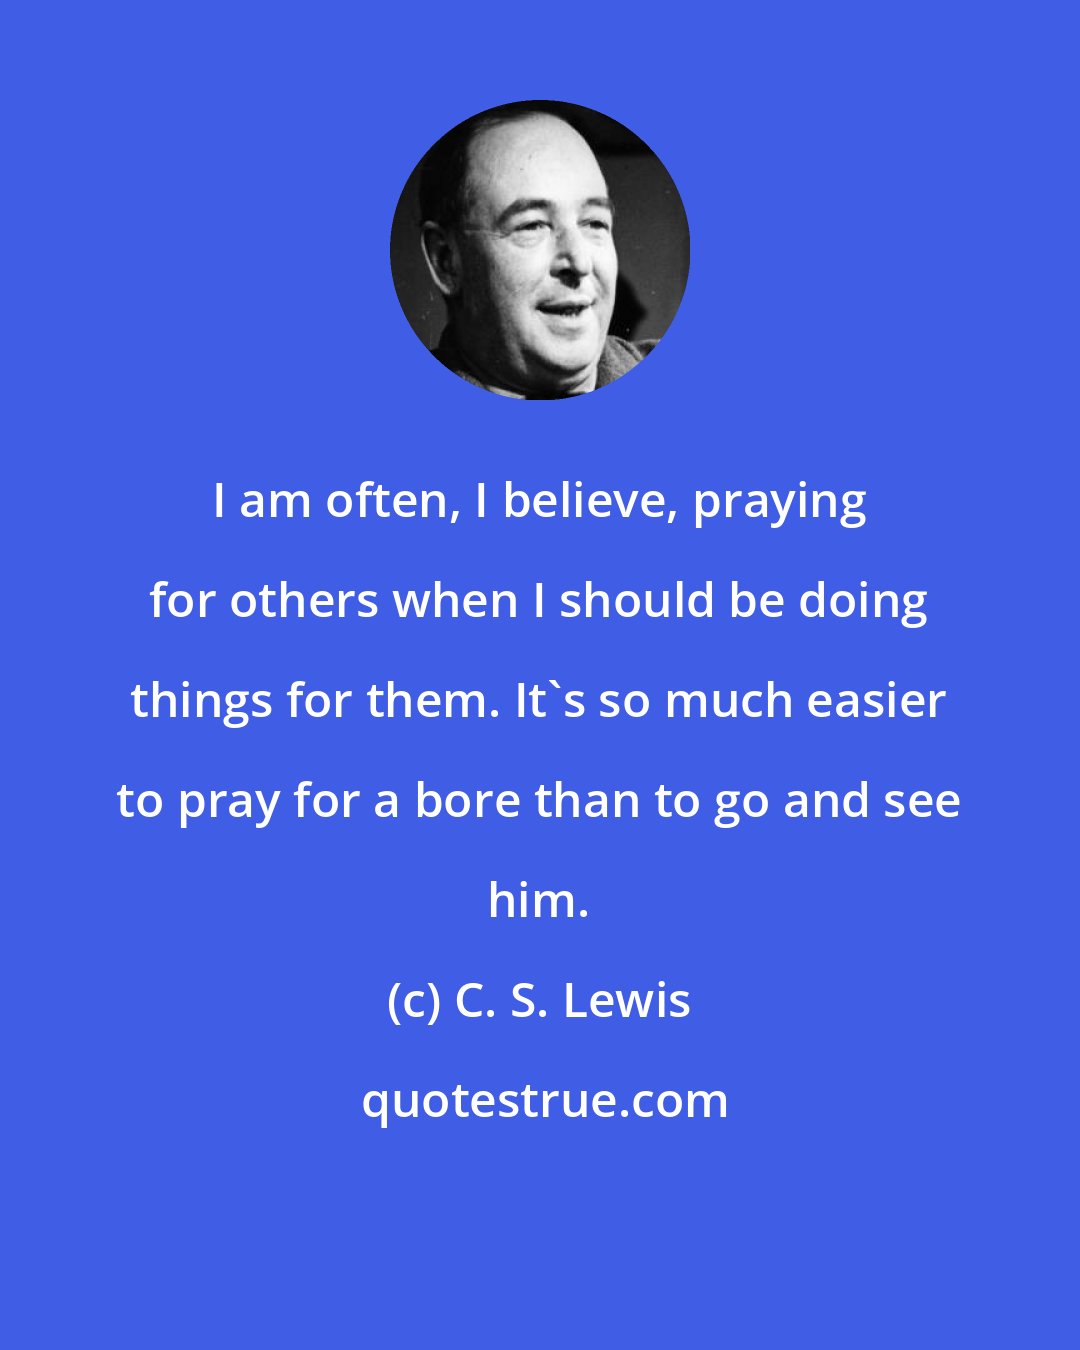 C. S. Lewis: I am often, I believe, praying for others when I should be doing things for them. It's so much easier to pray for a bore than to go and see him.